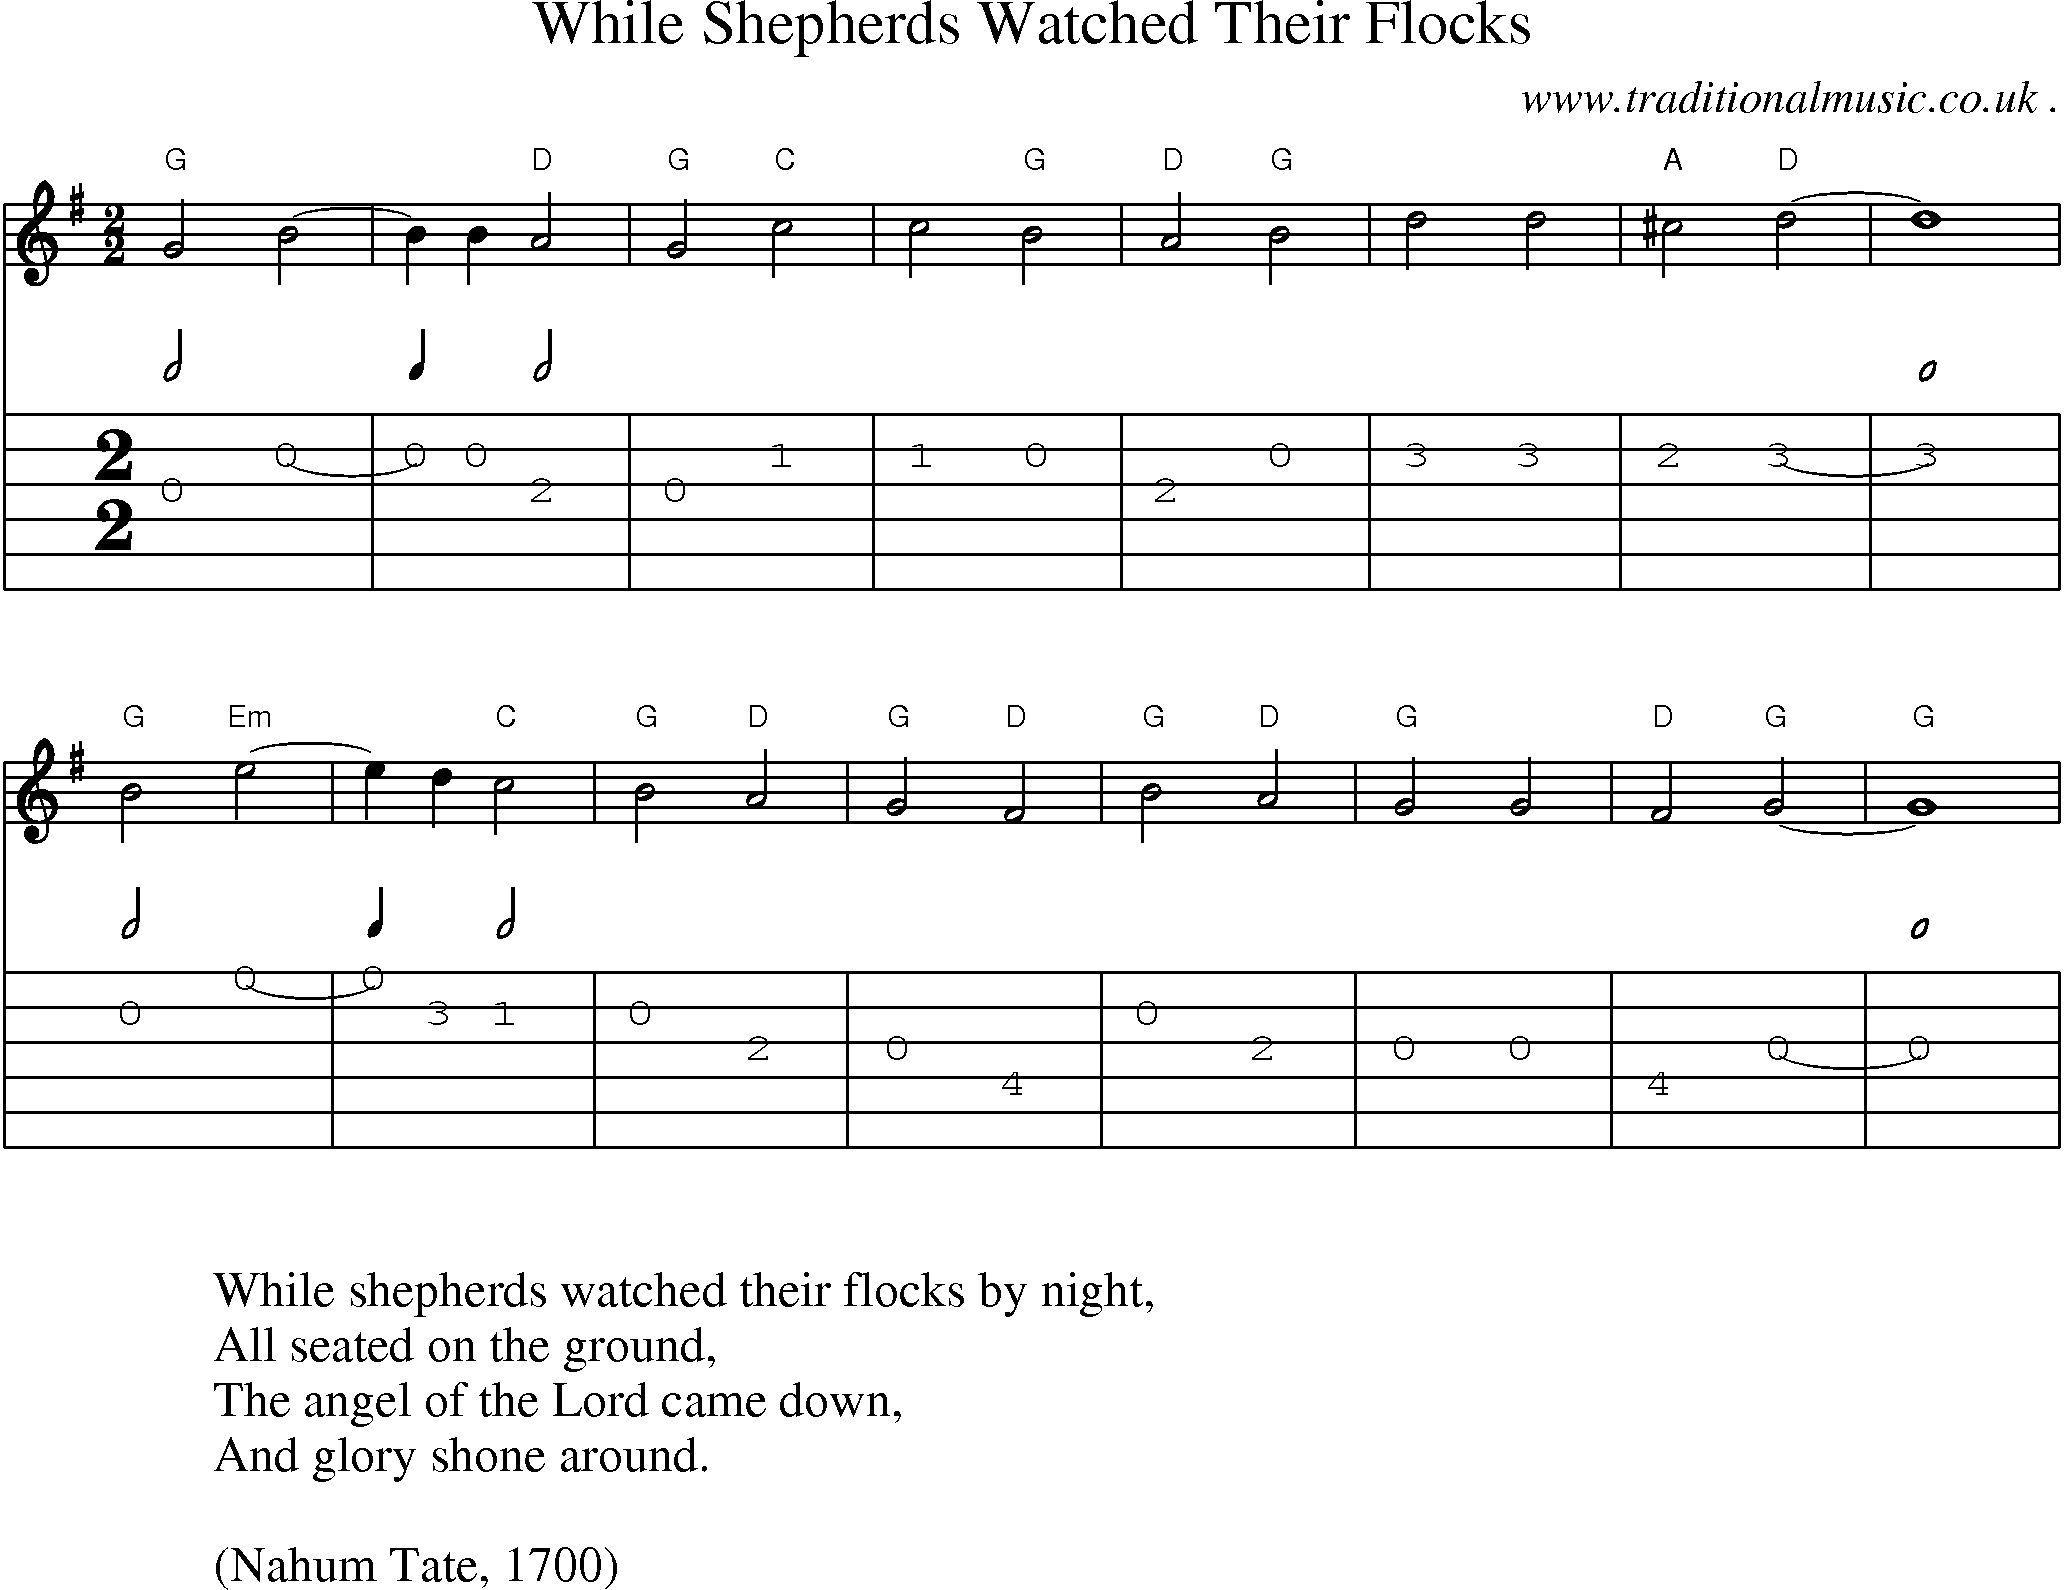 Music Score and Guitar Tabs for While Shepherds Watched Their Flocks